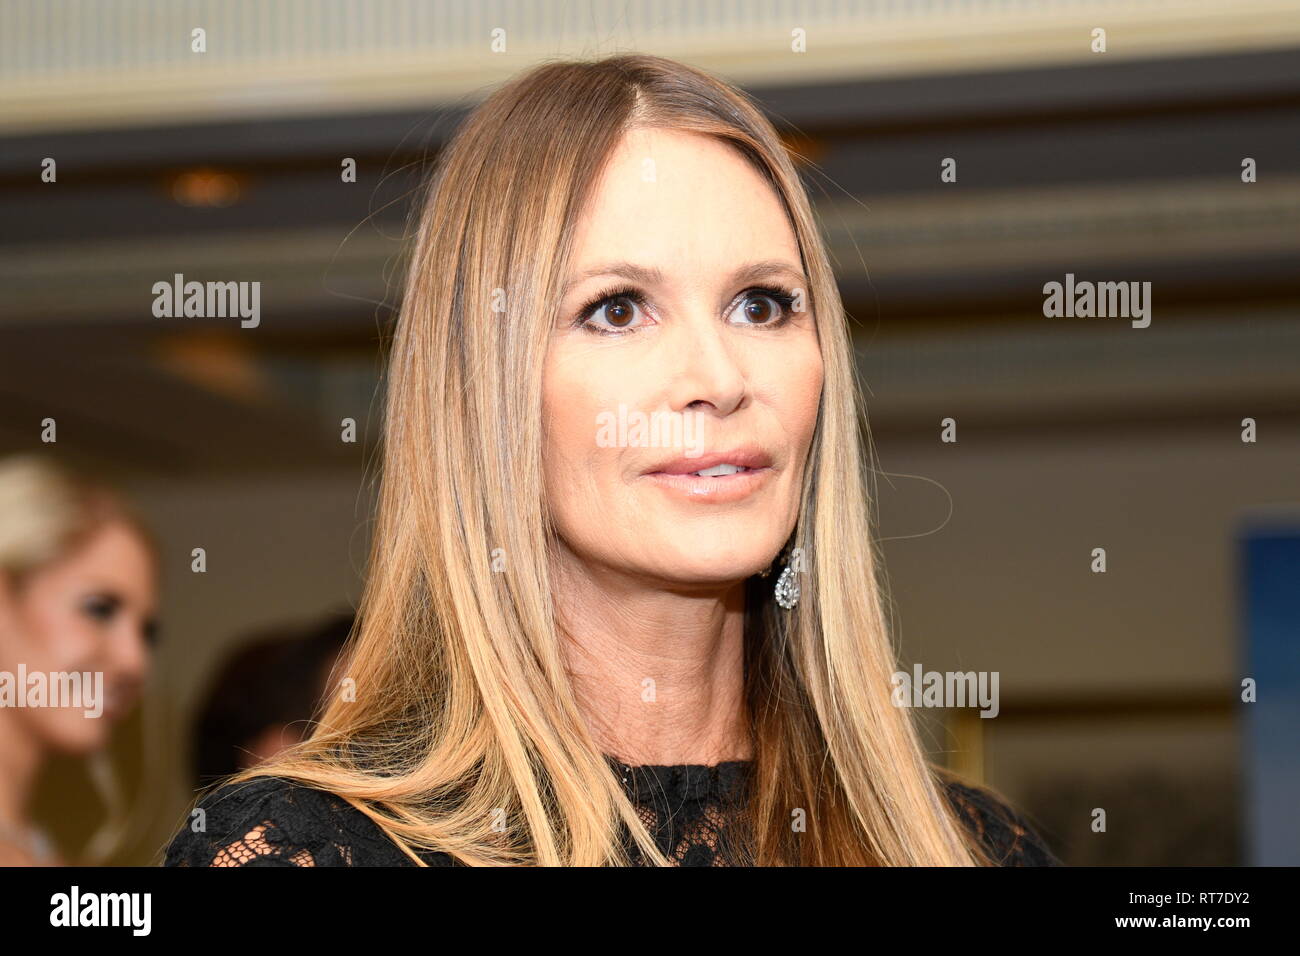 Vienna, Austria. 28th Feb, 2019. This year's opera ball guest of architect Richard Lugner is the former supermodel Elle Macpherson(The Body). Photo session in evening dress for press in the Grand Hotel in Vienna. Picture shows Elle Macpherson. Credit: Franz Perc/Alamy Live News Stock Photo